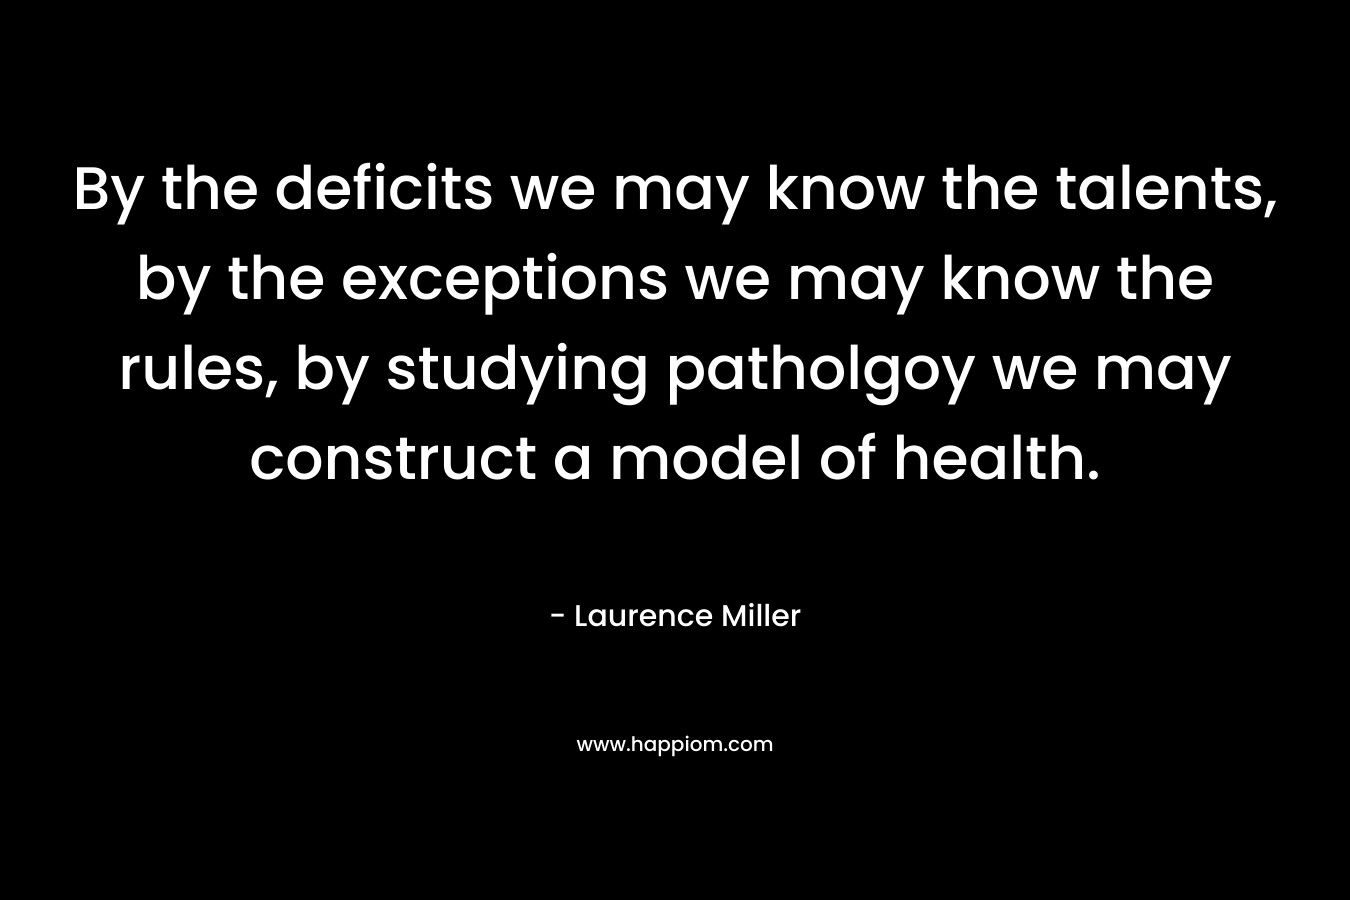 By the deficits we may know the talents, by the exceptions we may know the rules, by studying patholgoy we may construct a model of health. – Laurence Miller